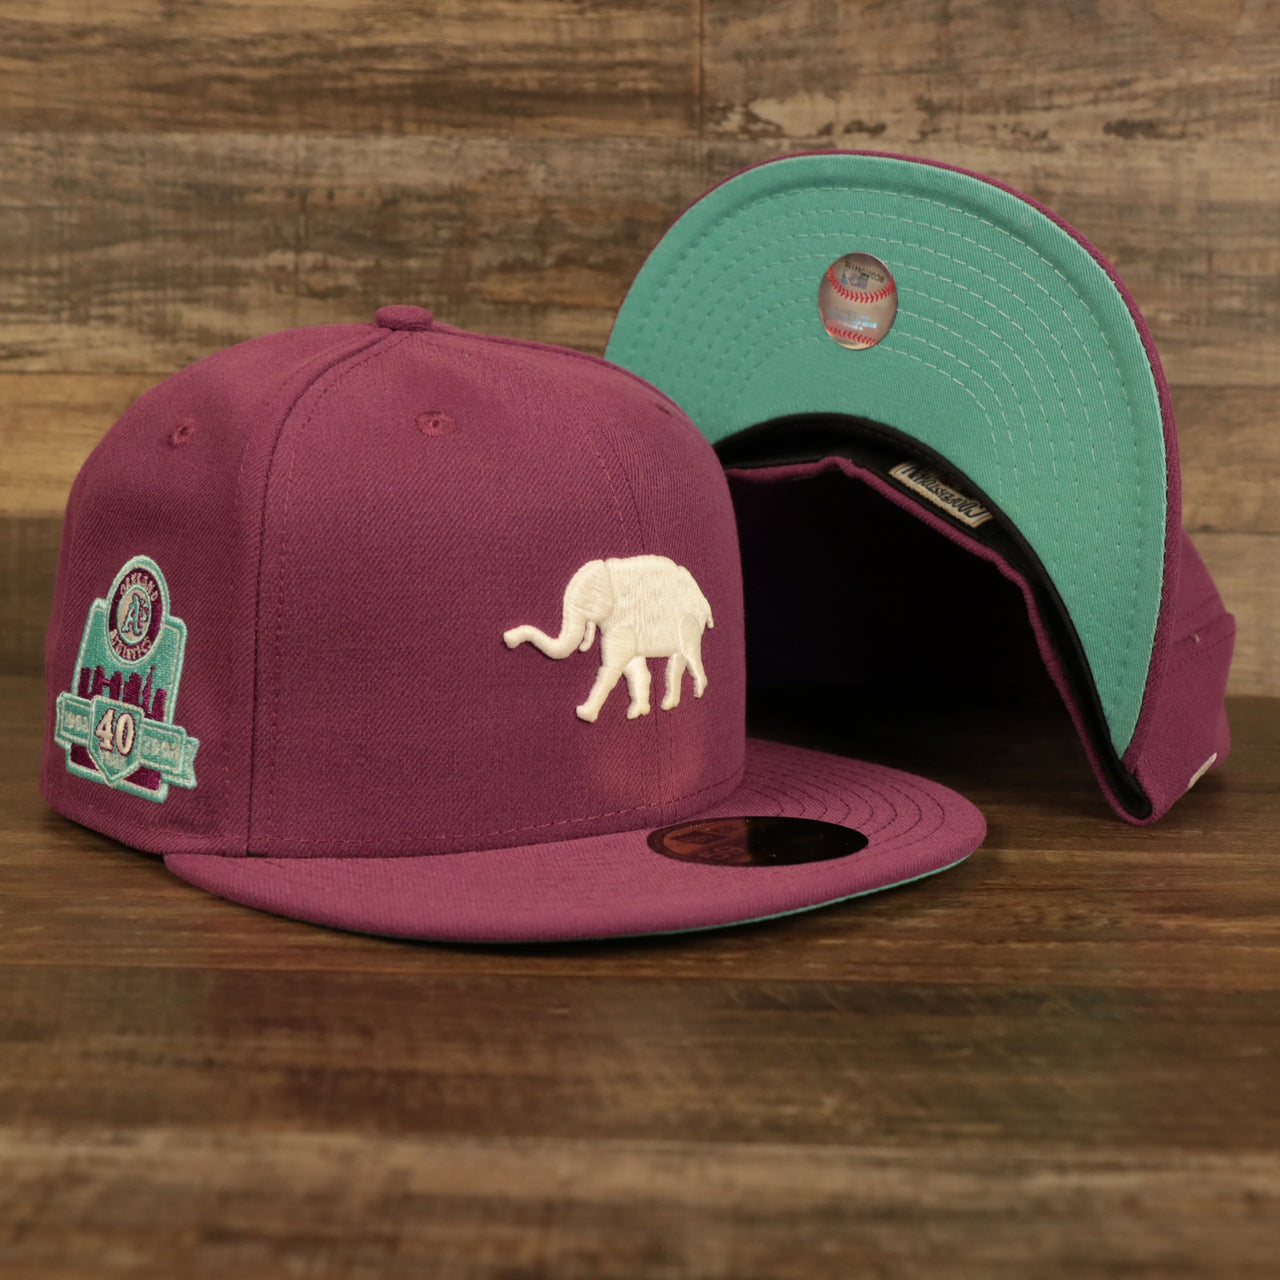 Philadelphia Athletics Glow In The Dark Oakland 40 Year Patch Teal Bottom Side Patch 59Fifty Fitted Cap